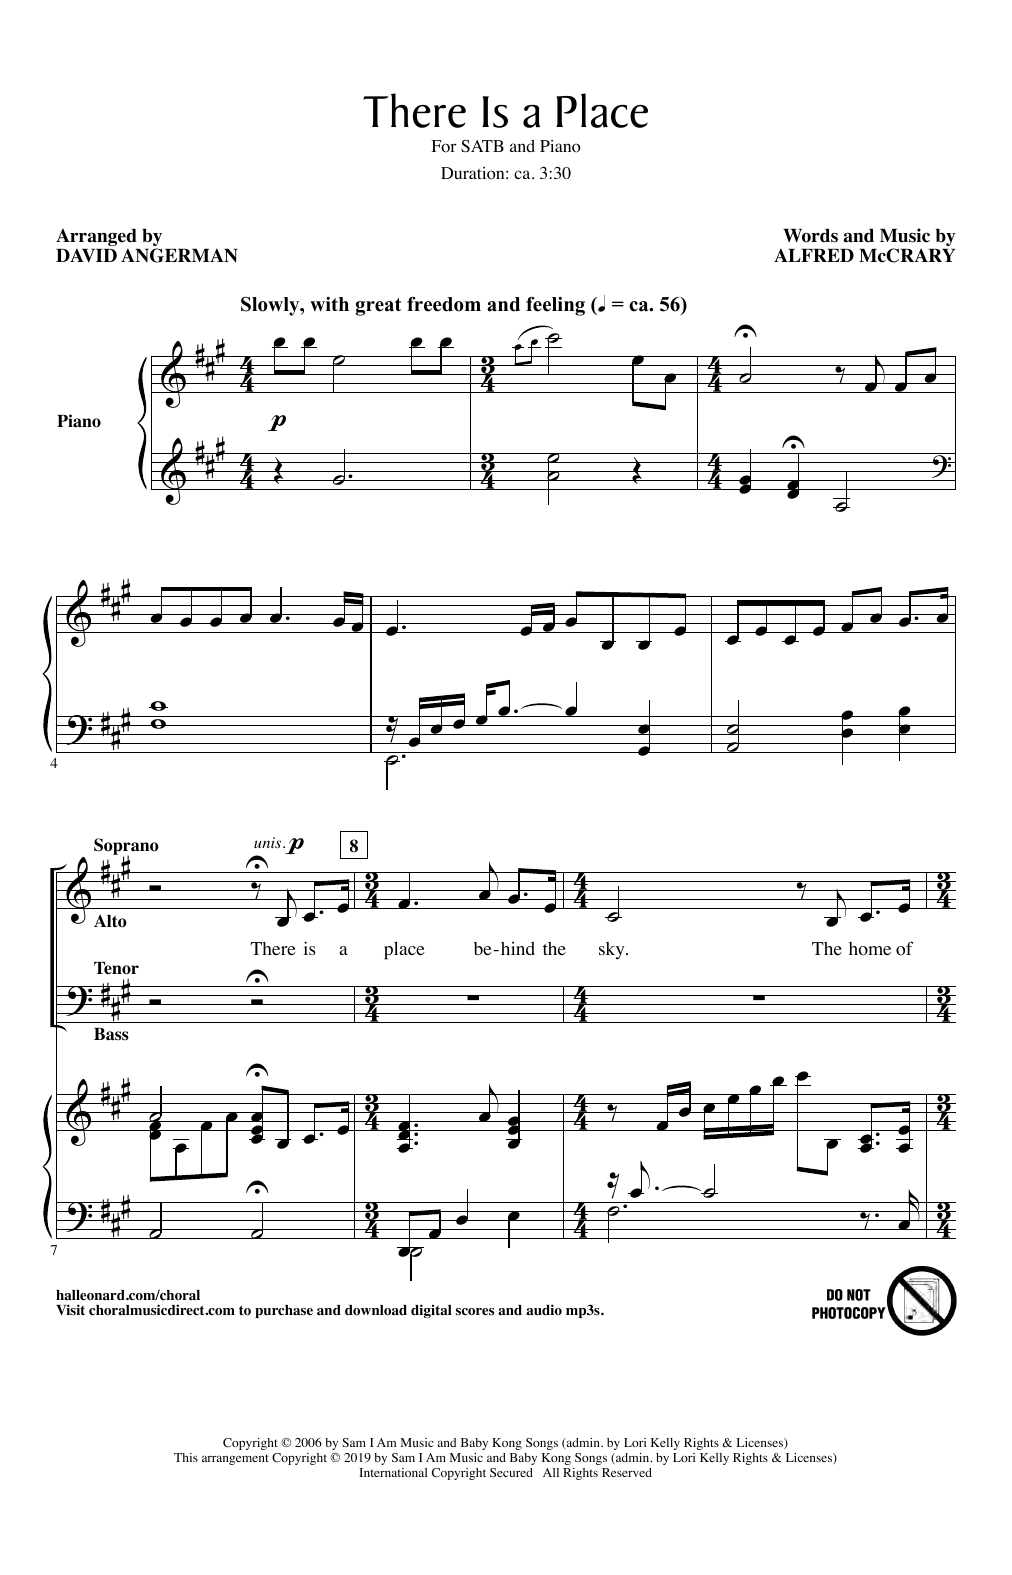 Download Alfred McCrary There Is A Place (arr. David Angerman) Sheet Music